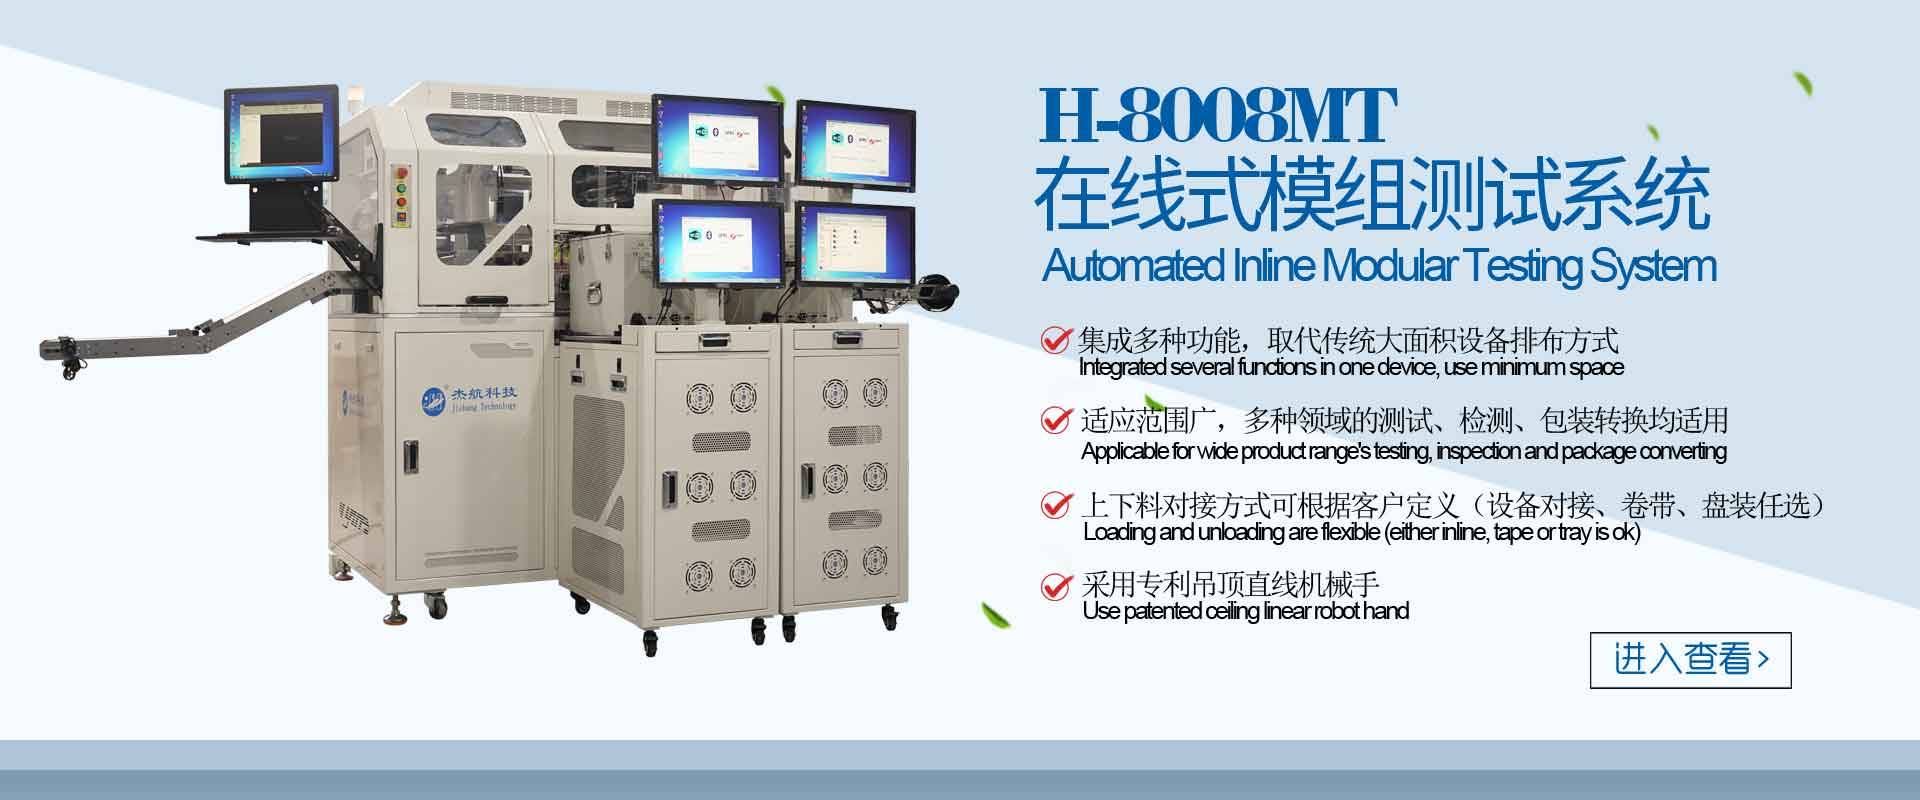 H-8008MT Automated Inline Modular Testing System